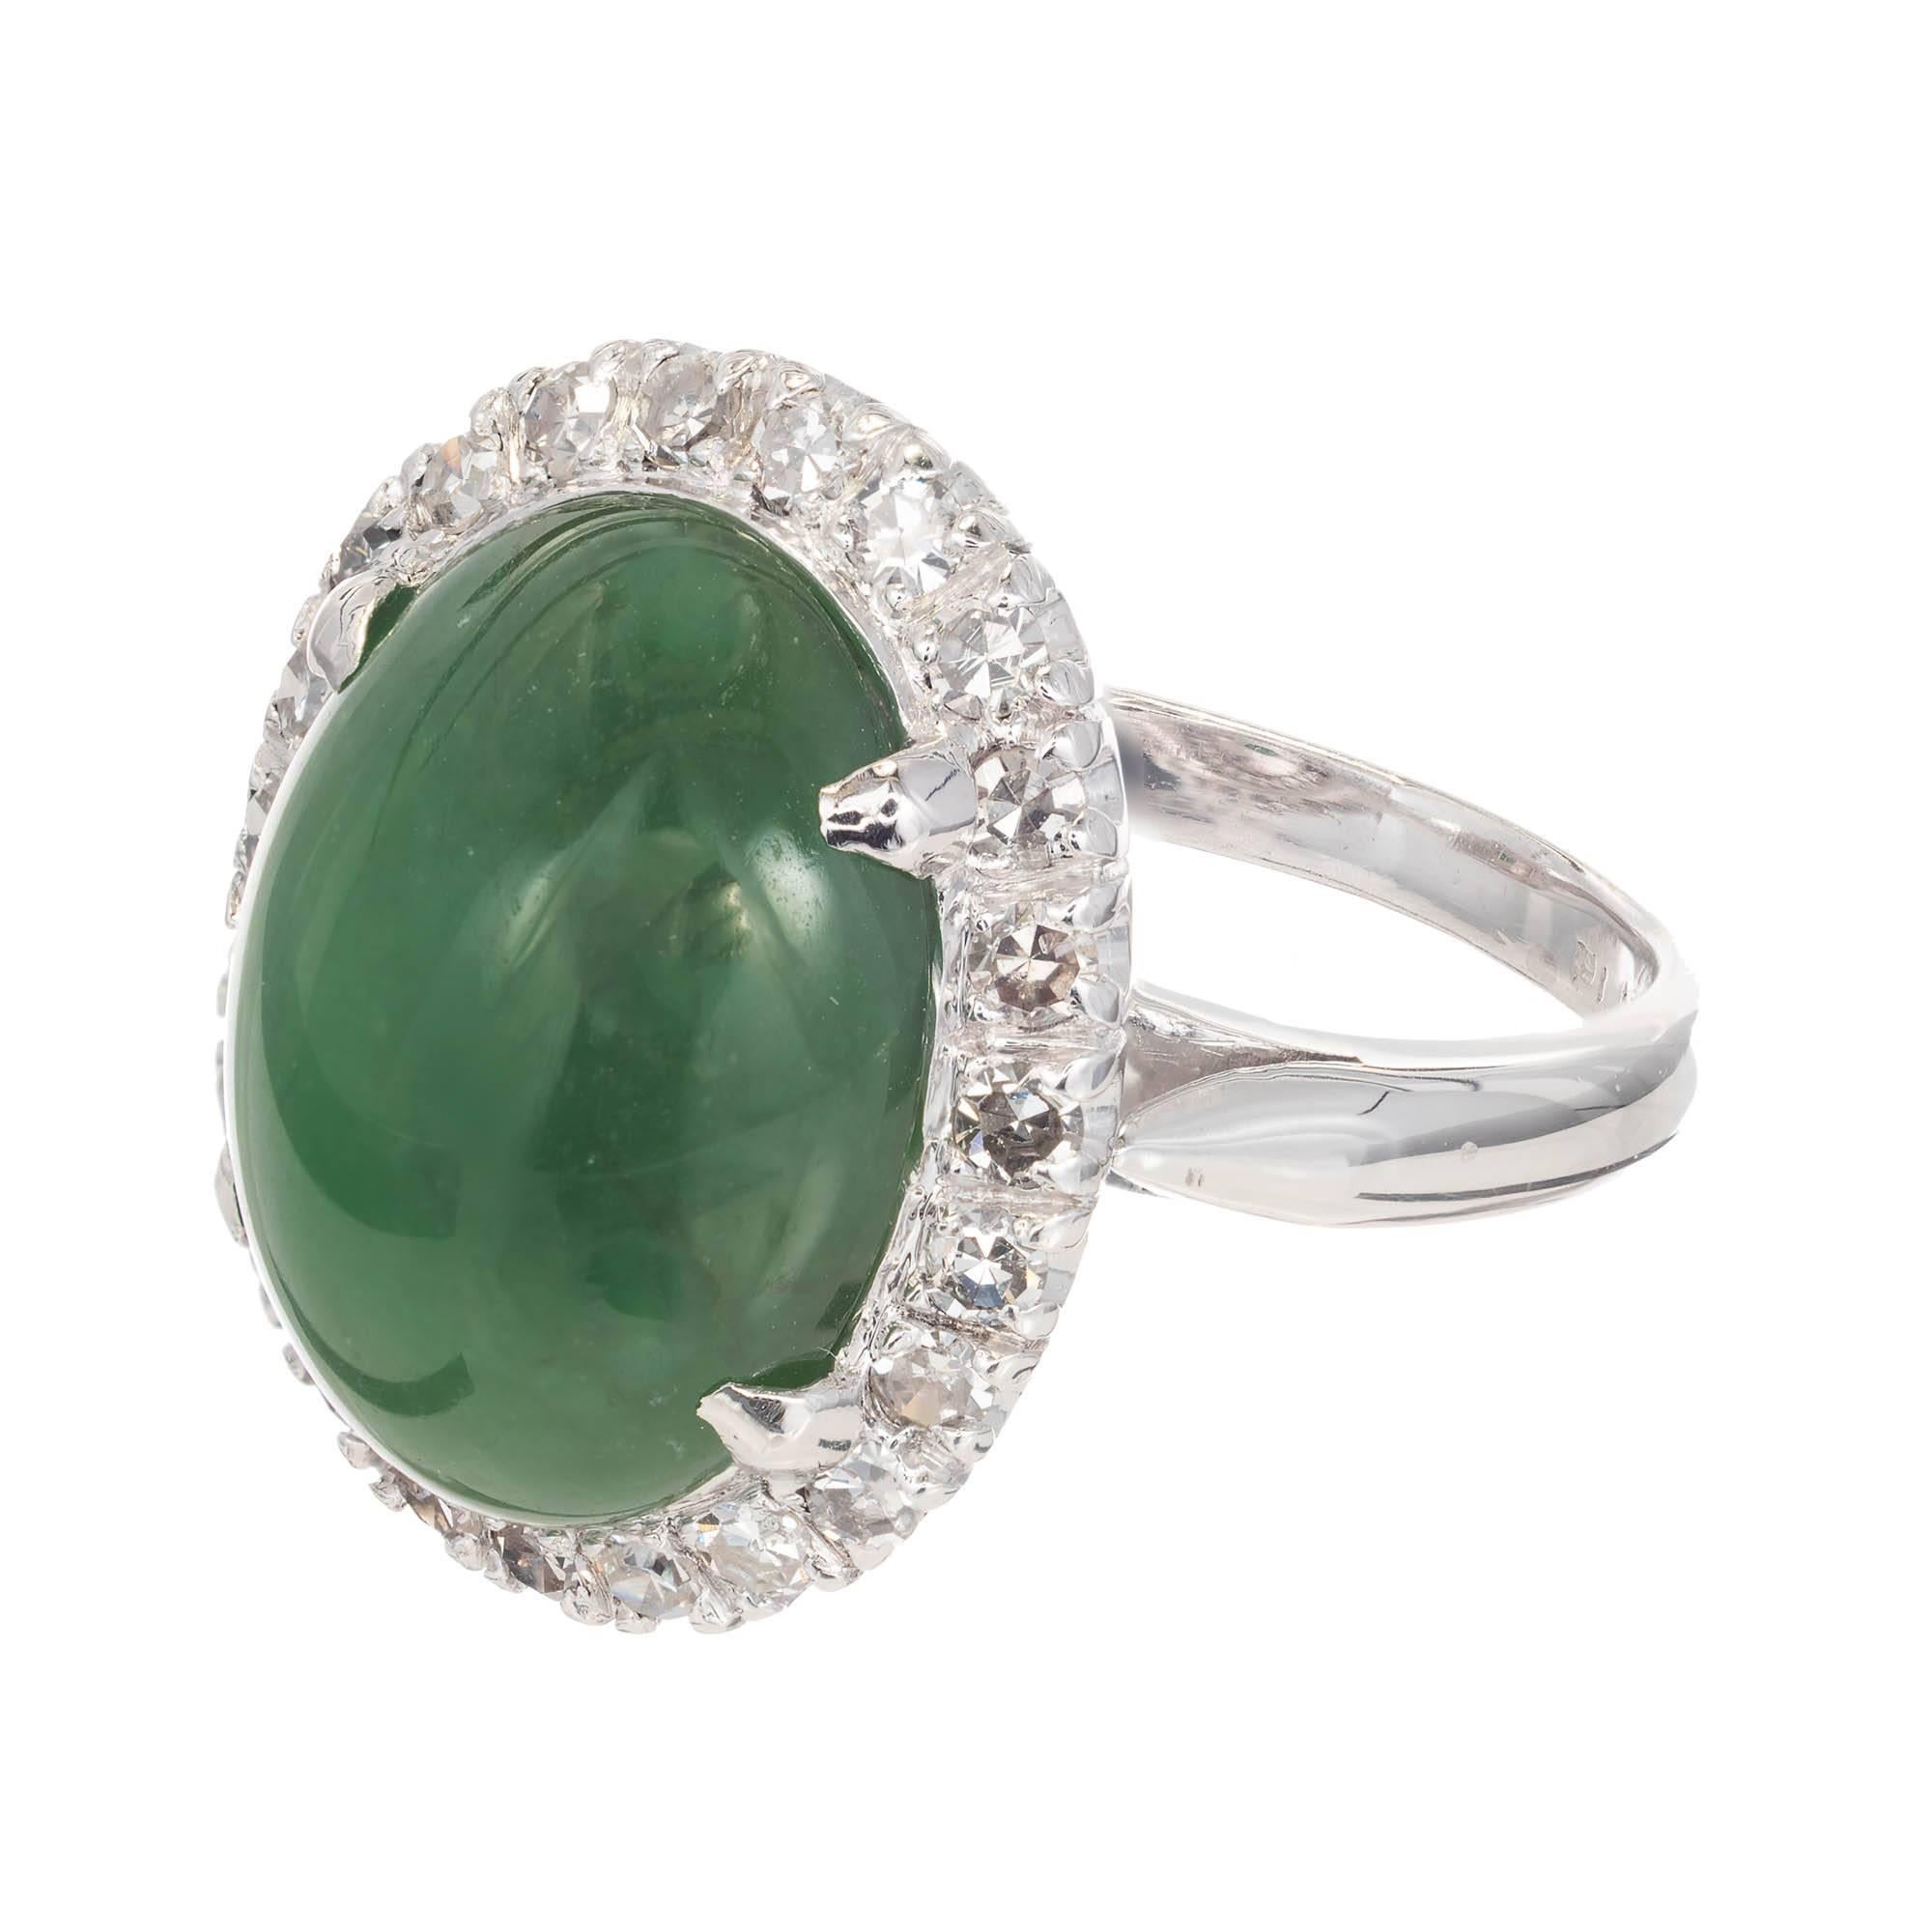 Green jade and diamond cocktail ring. Natural green oval jade cabochon surrounded by a halo of round diamonds in a platinum setting. GIA certified.

1 oval cabochon green jadeite jade 13.77 x 10.37x 5.74 GIA Certificate # 1196149219
24 single cut